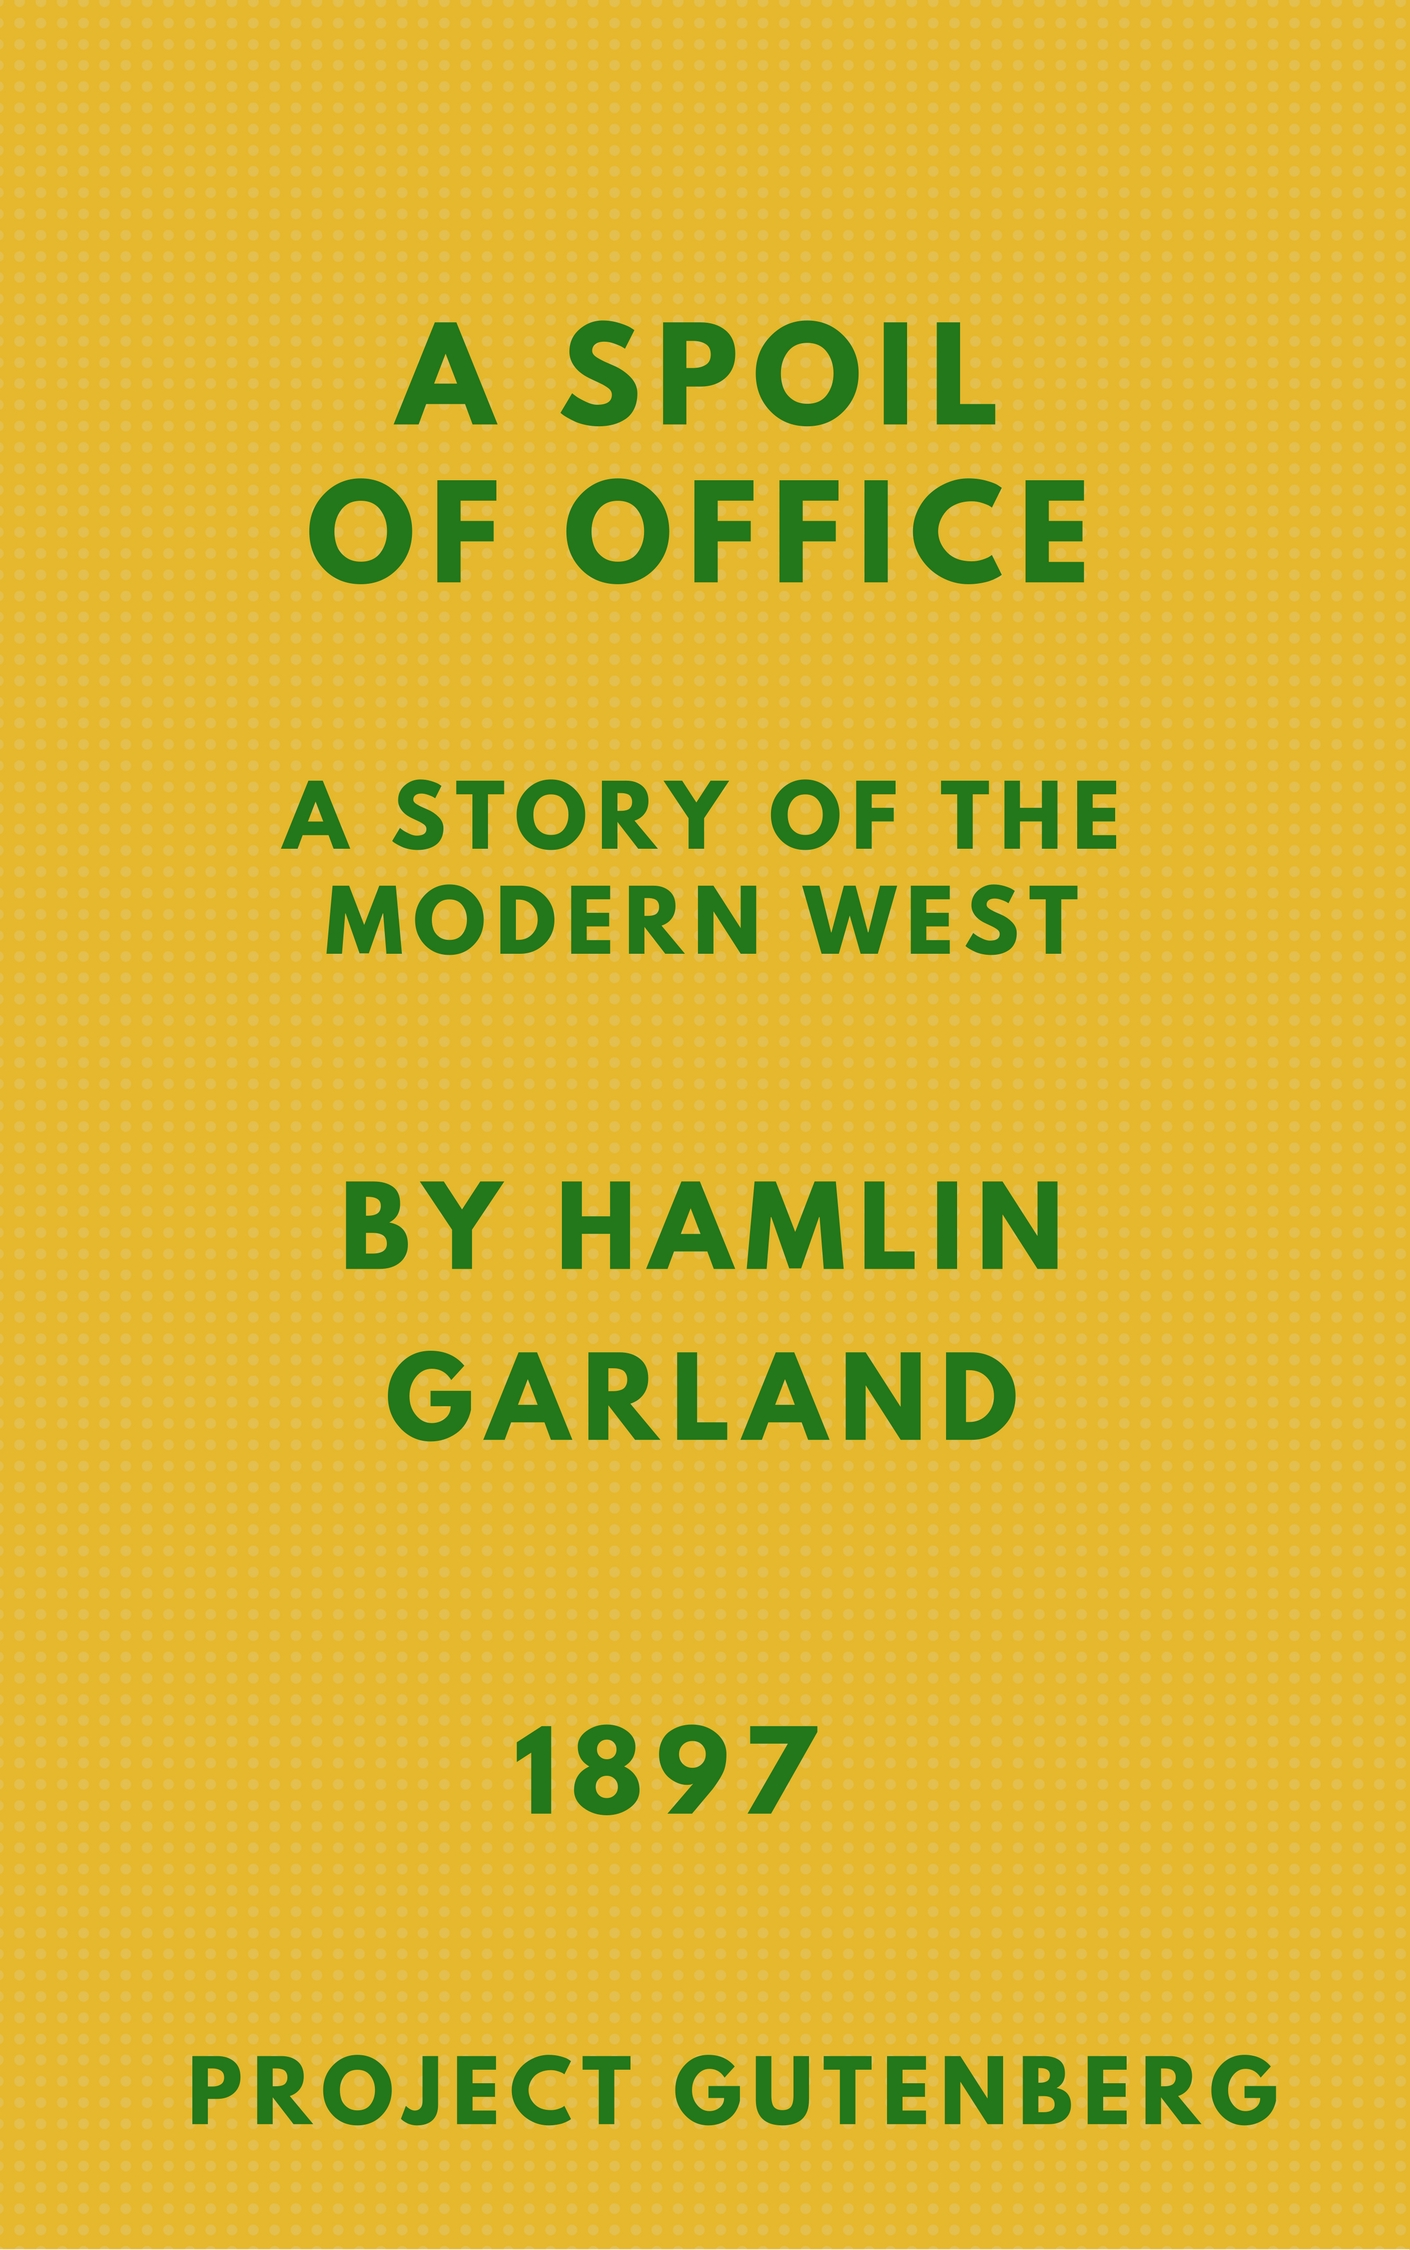 A Spoil of Office: A Story of the Modern West